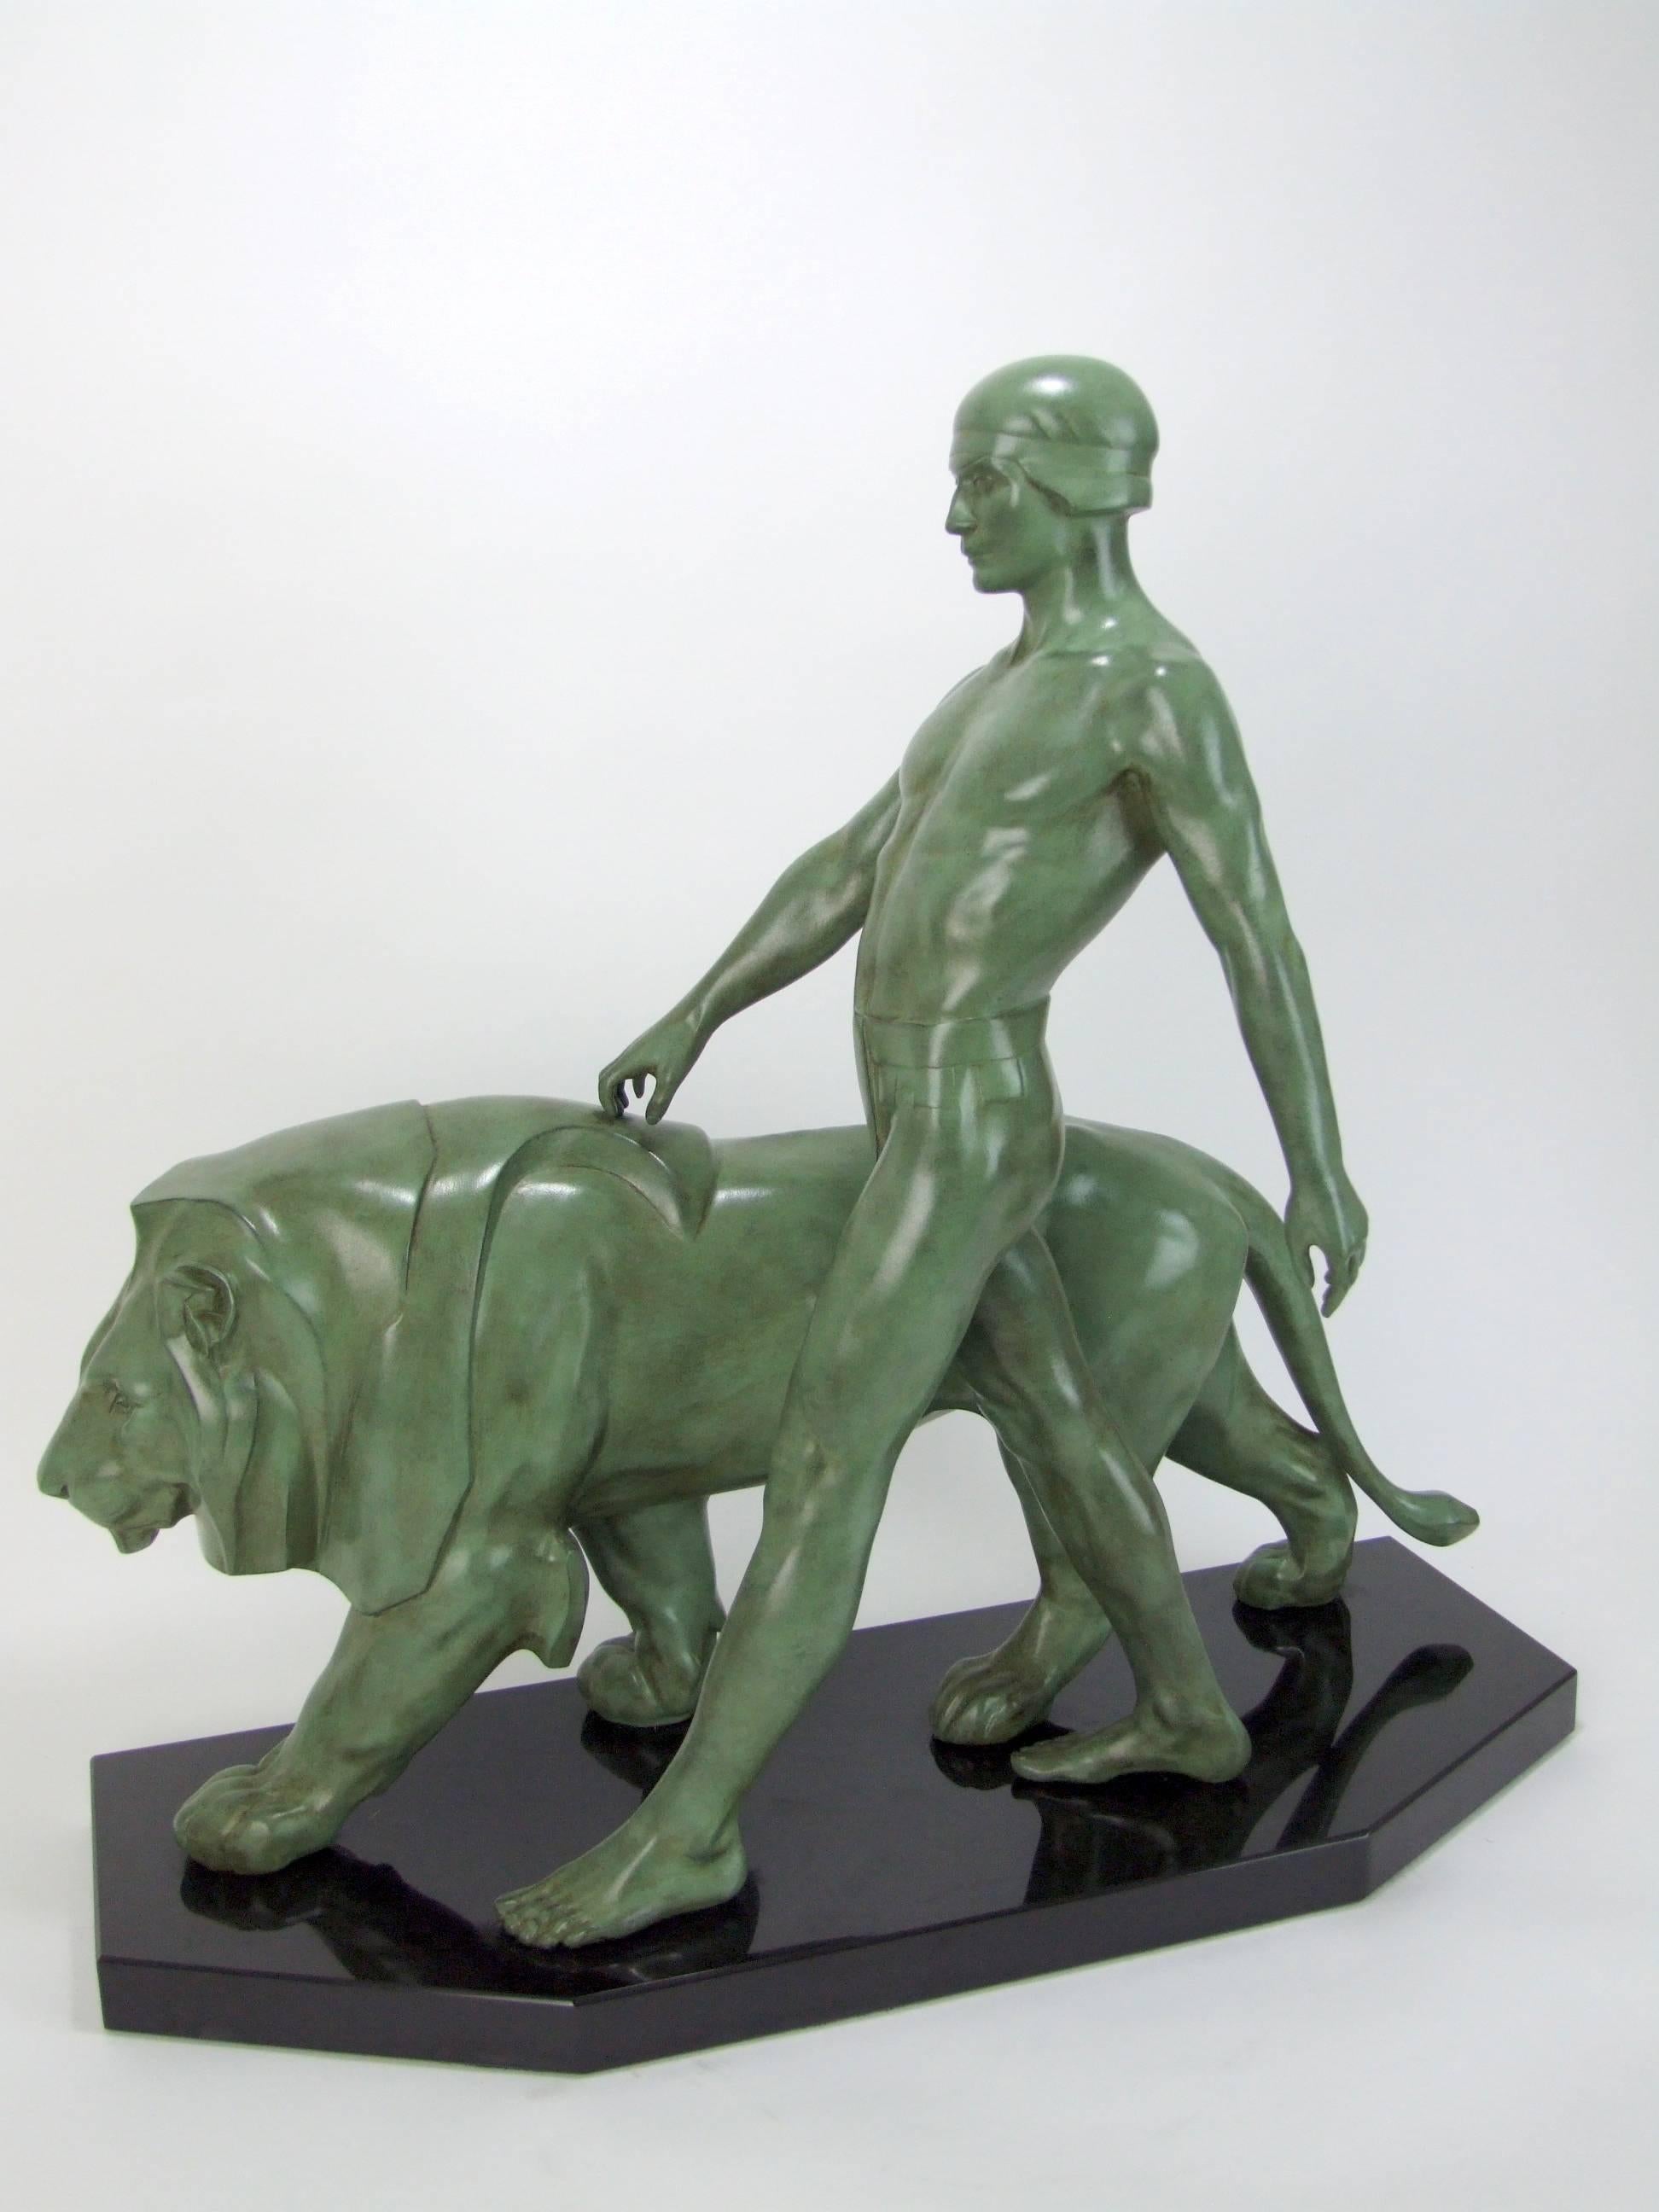 'Bellauer' or Gladiator by Max Le Verrier. A very large and rare Art Deco figural group of a man and lion, made of art metal and signed Le Verrier to the metal. This figure does not come up for sale very often. Mounted on a Belgian black marble base